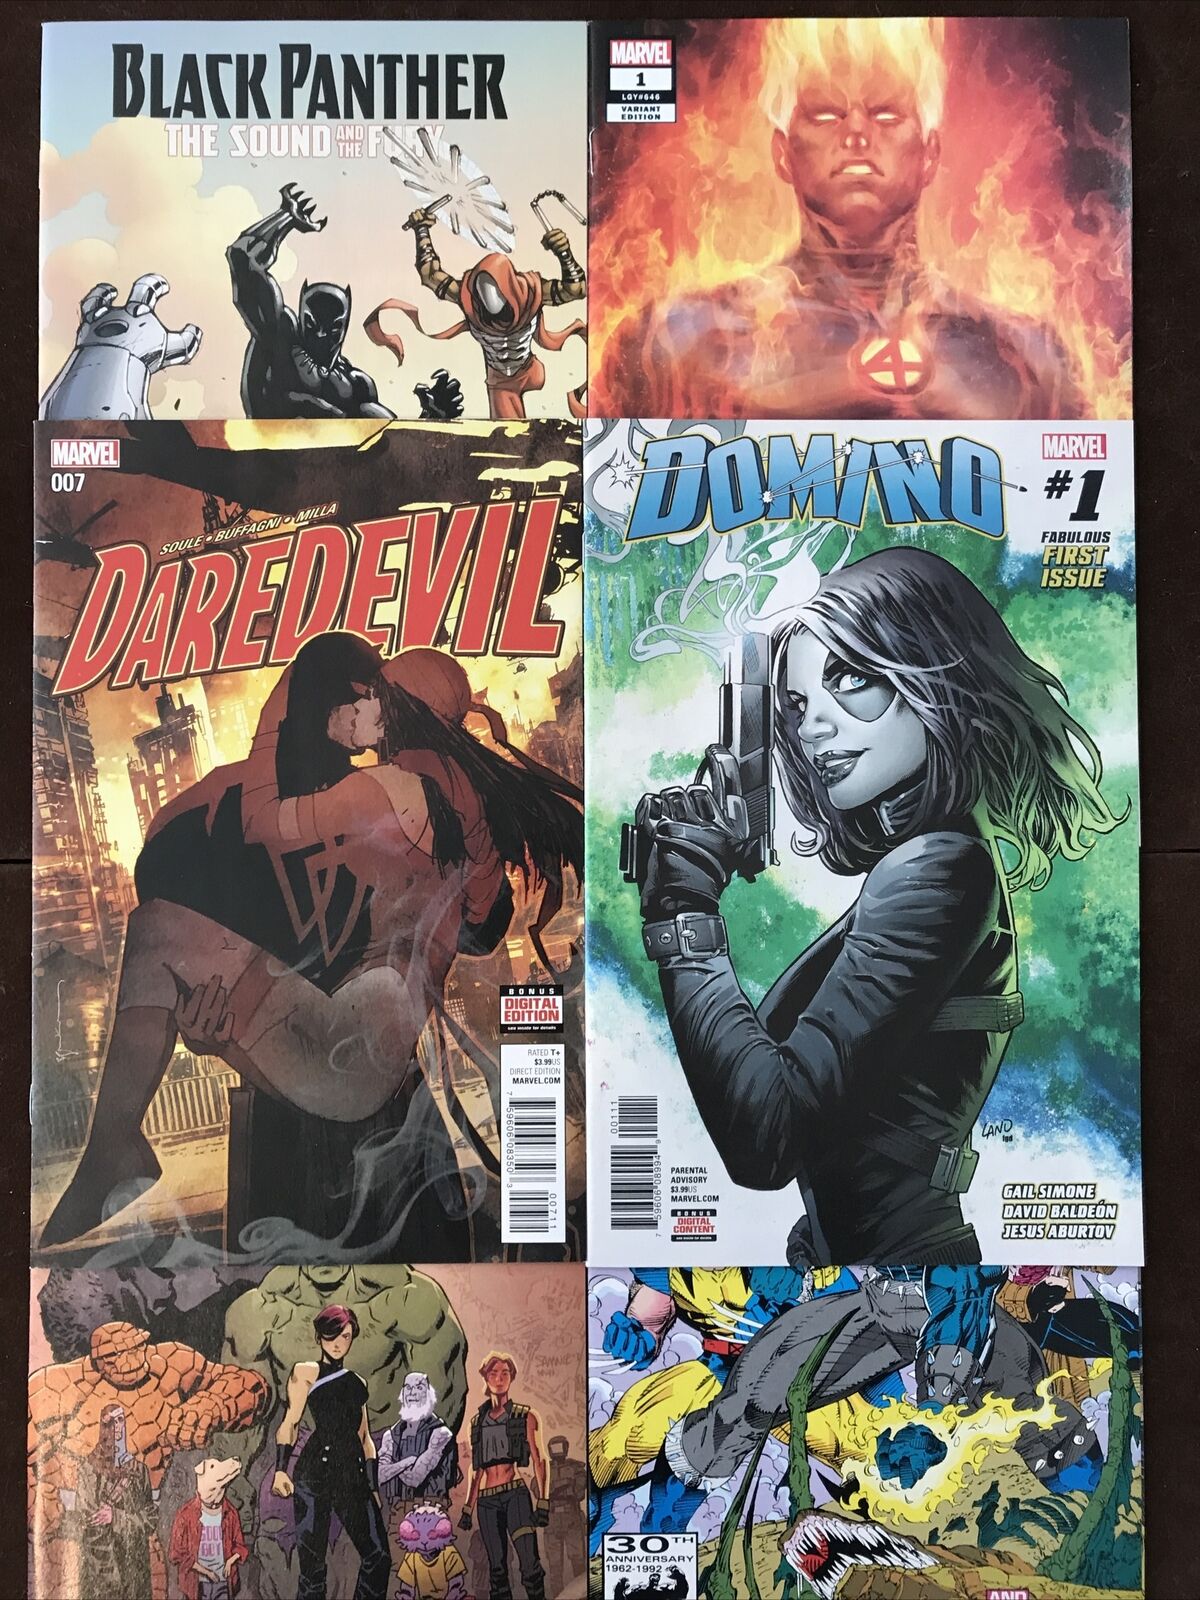 Marvel Comics Mixed Lot Of 6 Domino #1 Daredevil #7 Black Panther Variant More